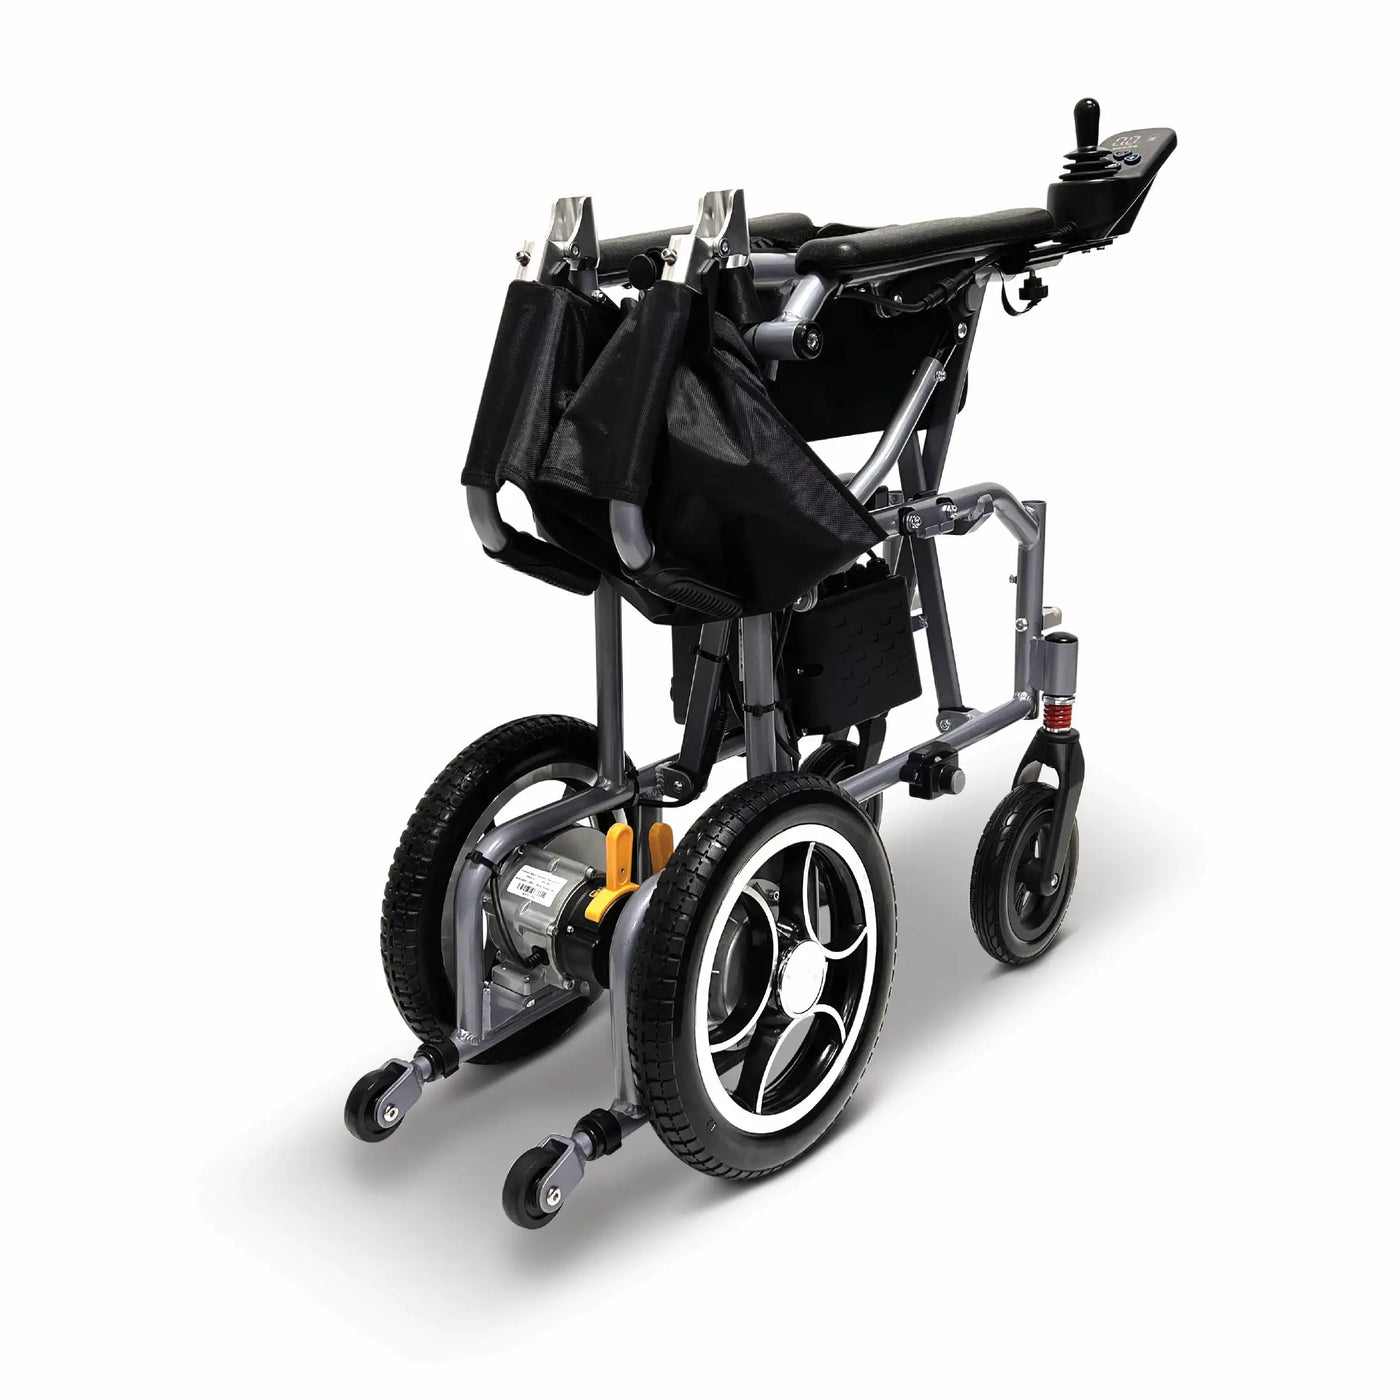 X-7 ComfyGO Lightweight Foldable Electric Wheelchair for Travel with Remote Control